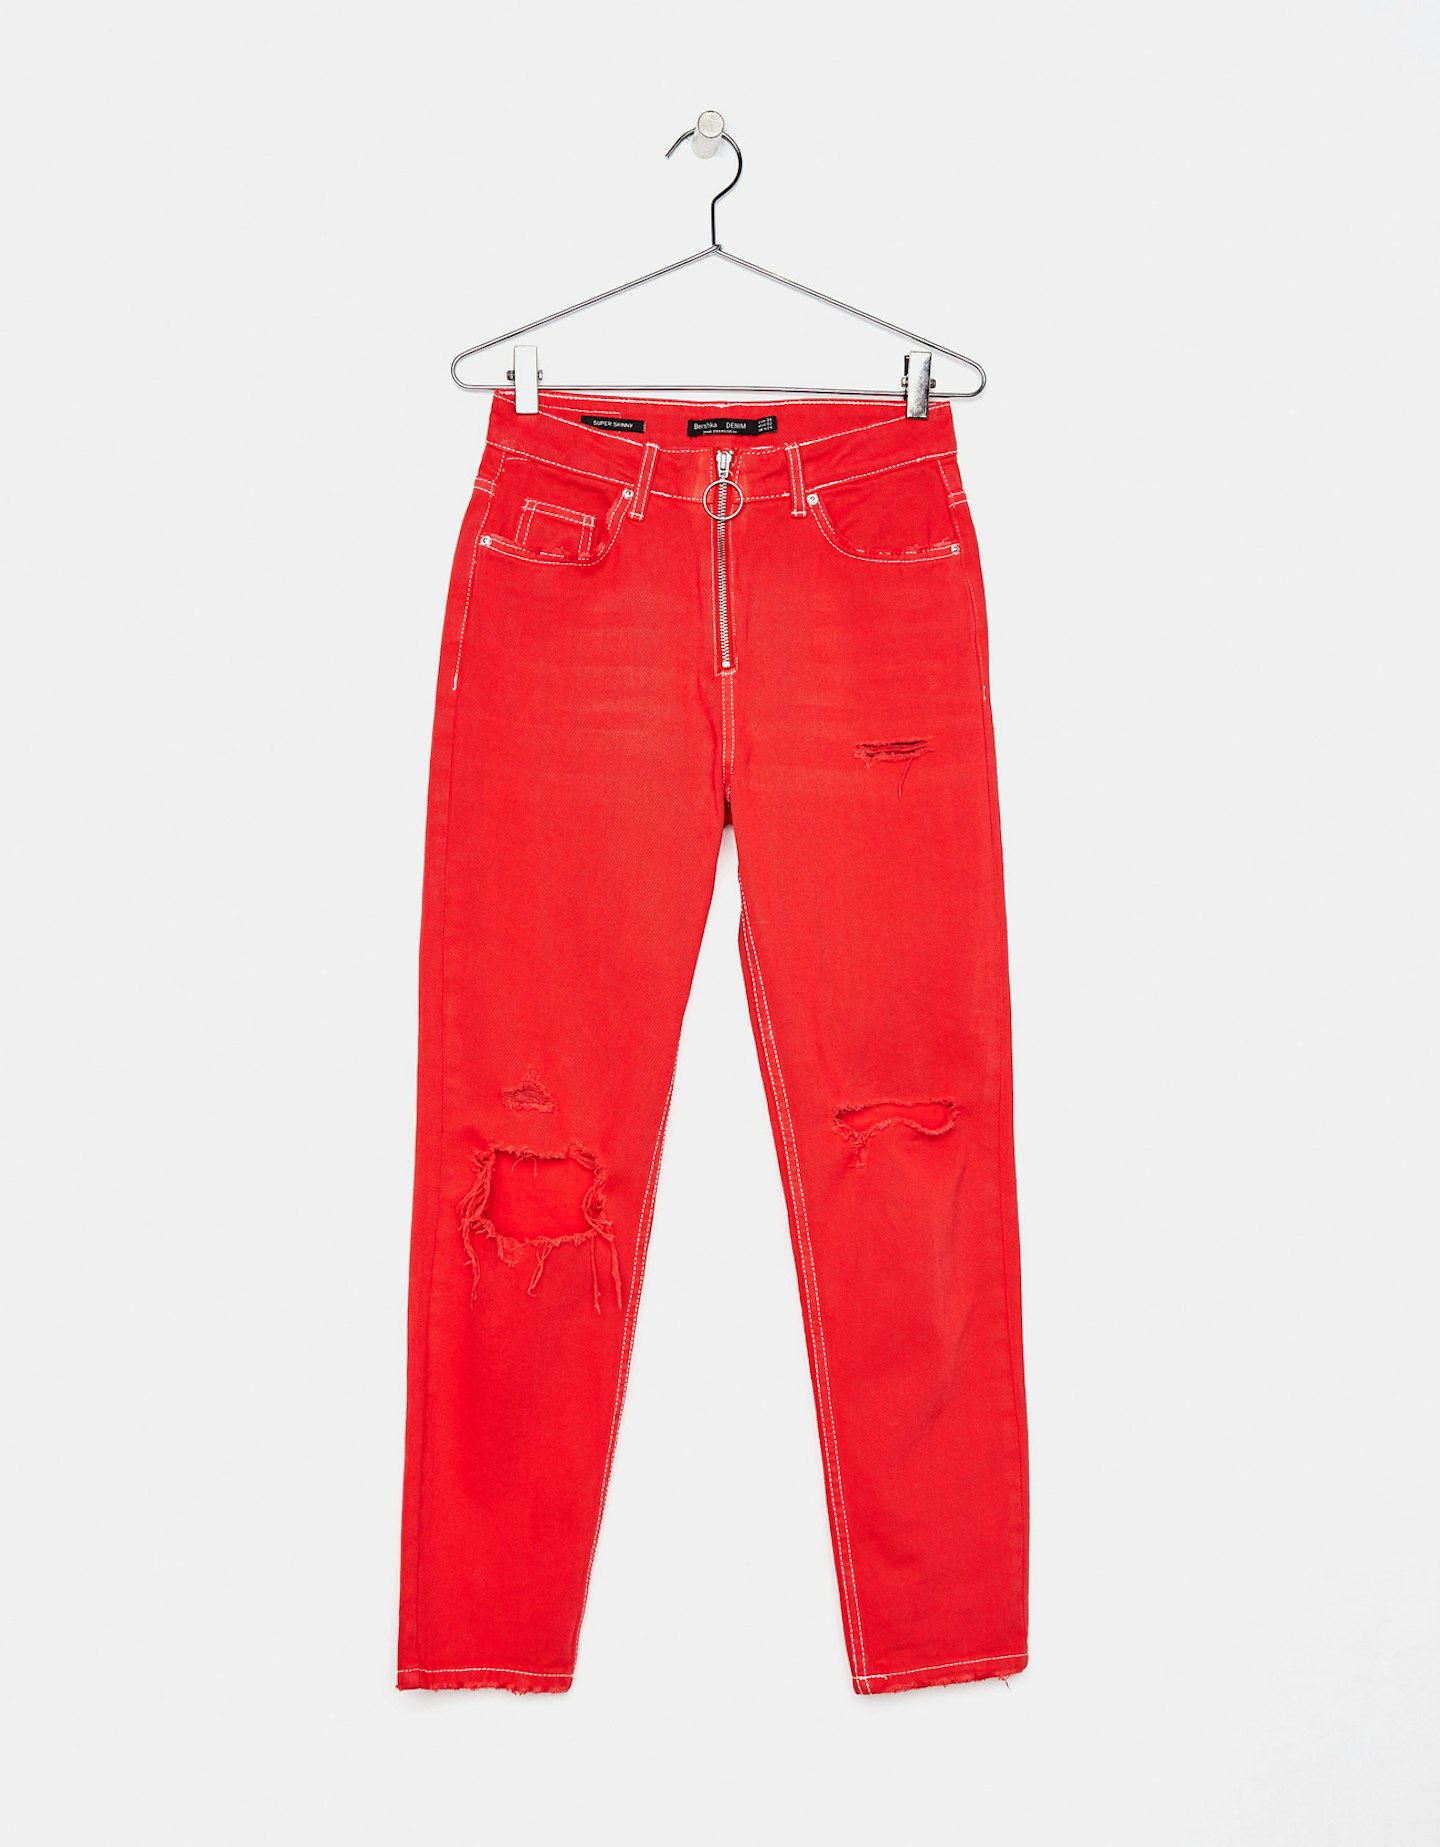 Slim fit jeans with ring zip pull by Bershka, £25.99